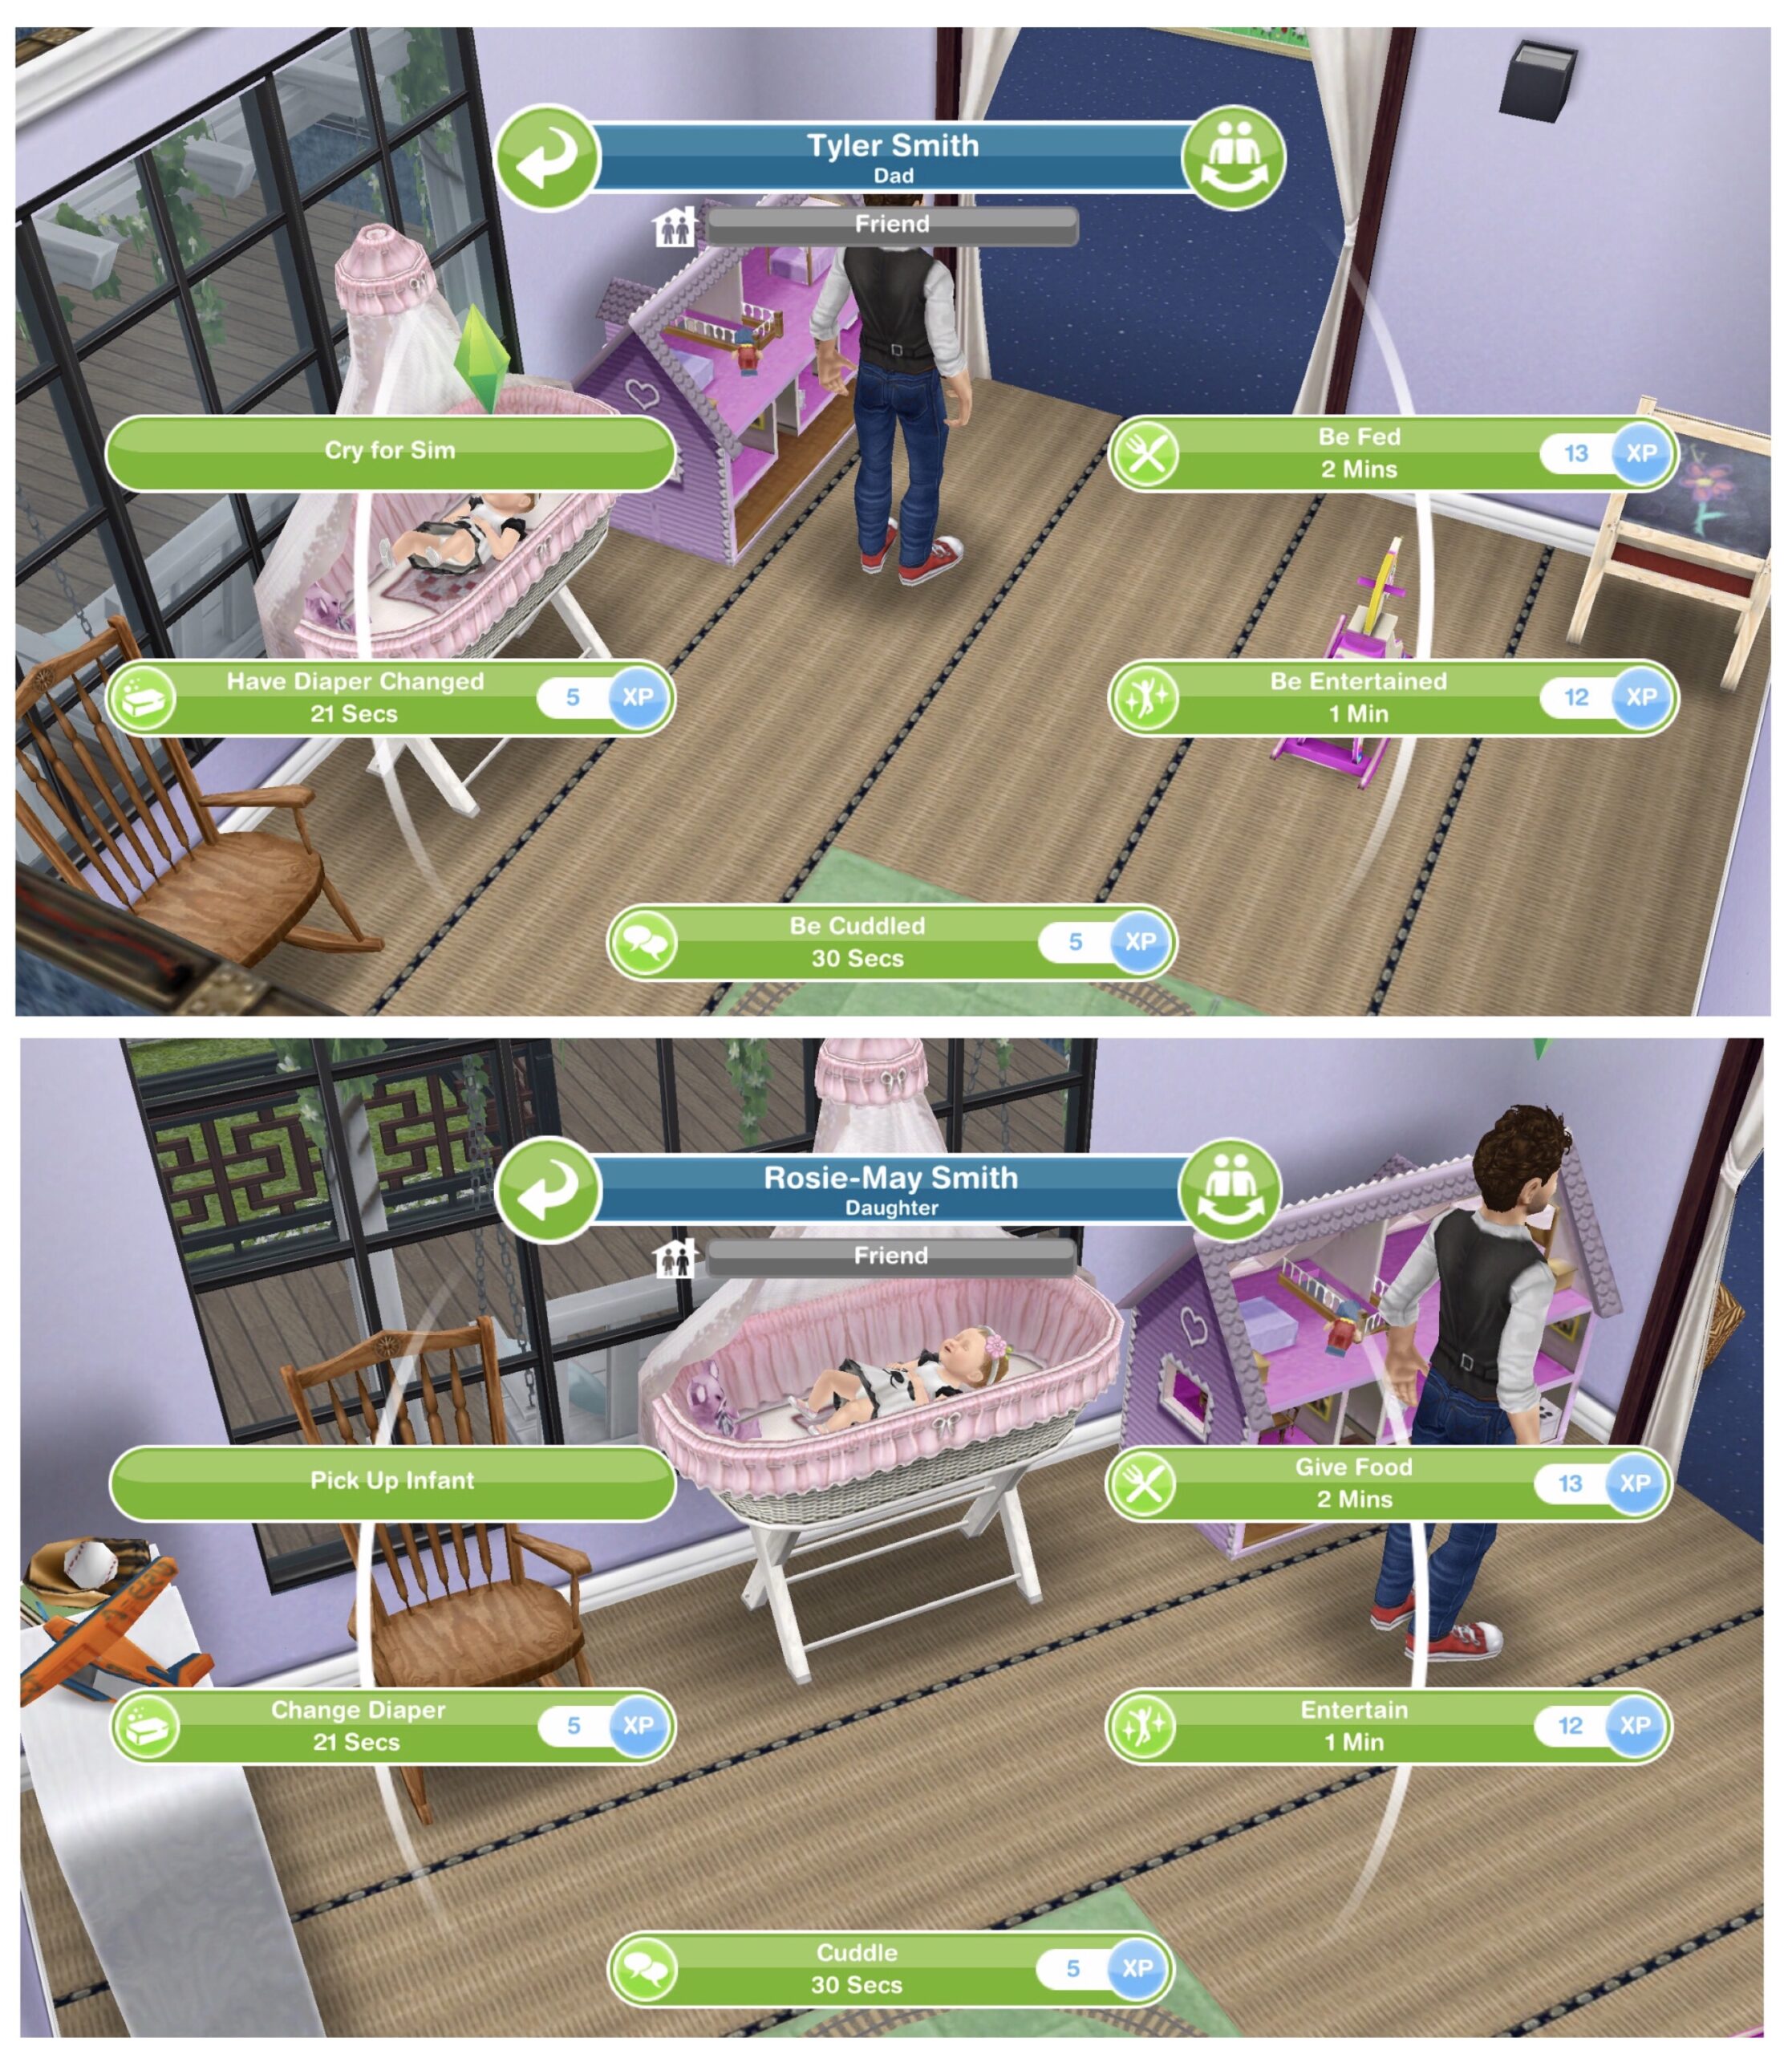 how does baby use toilet in sims freeplay Sims free play baby toiletten-balken trotz windeln wechseln rot? (sims